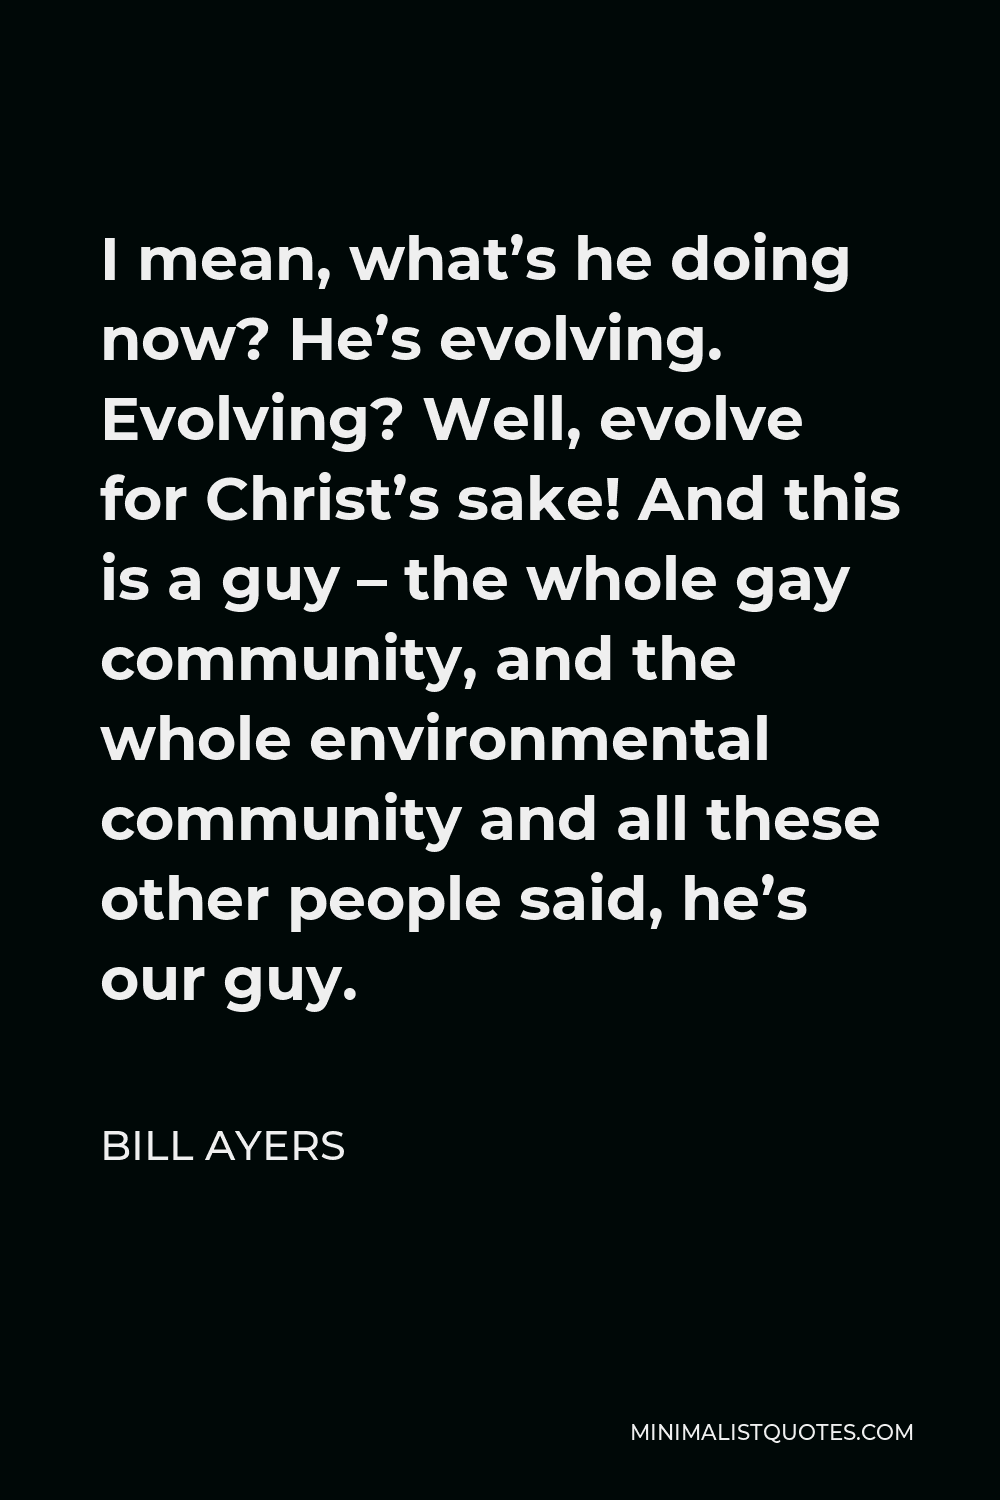 Bill Ayers Quote - I mean, what’s he doing now? He’s evolving. Evolving? Well, evolve for Christ’s sake! And this is a guy – the whole gay community, and the whole environmental community and all these other people said, he’s our guy.